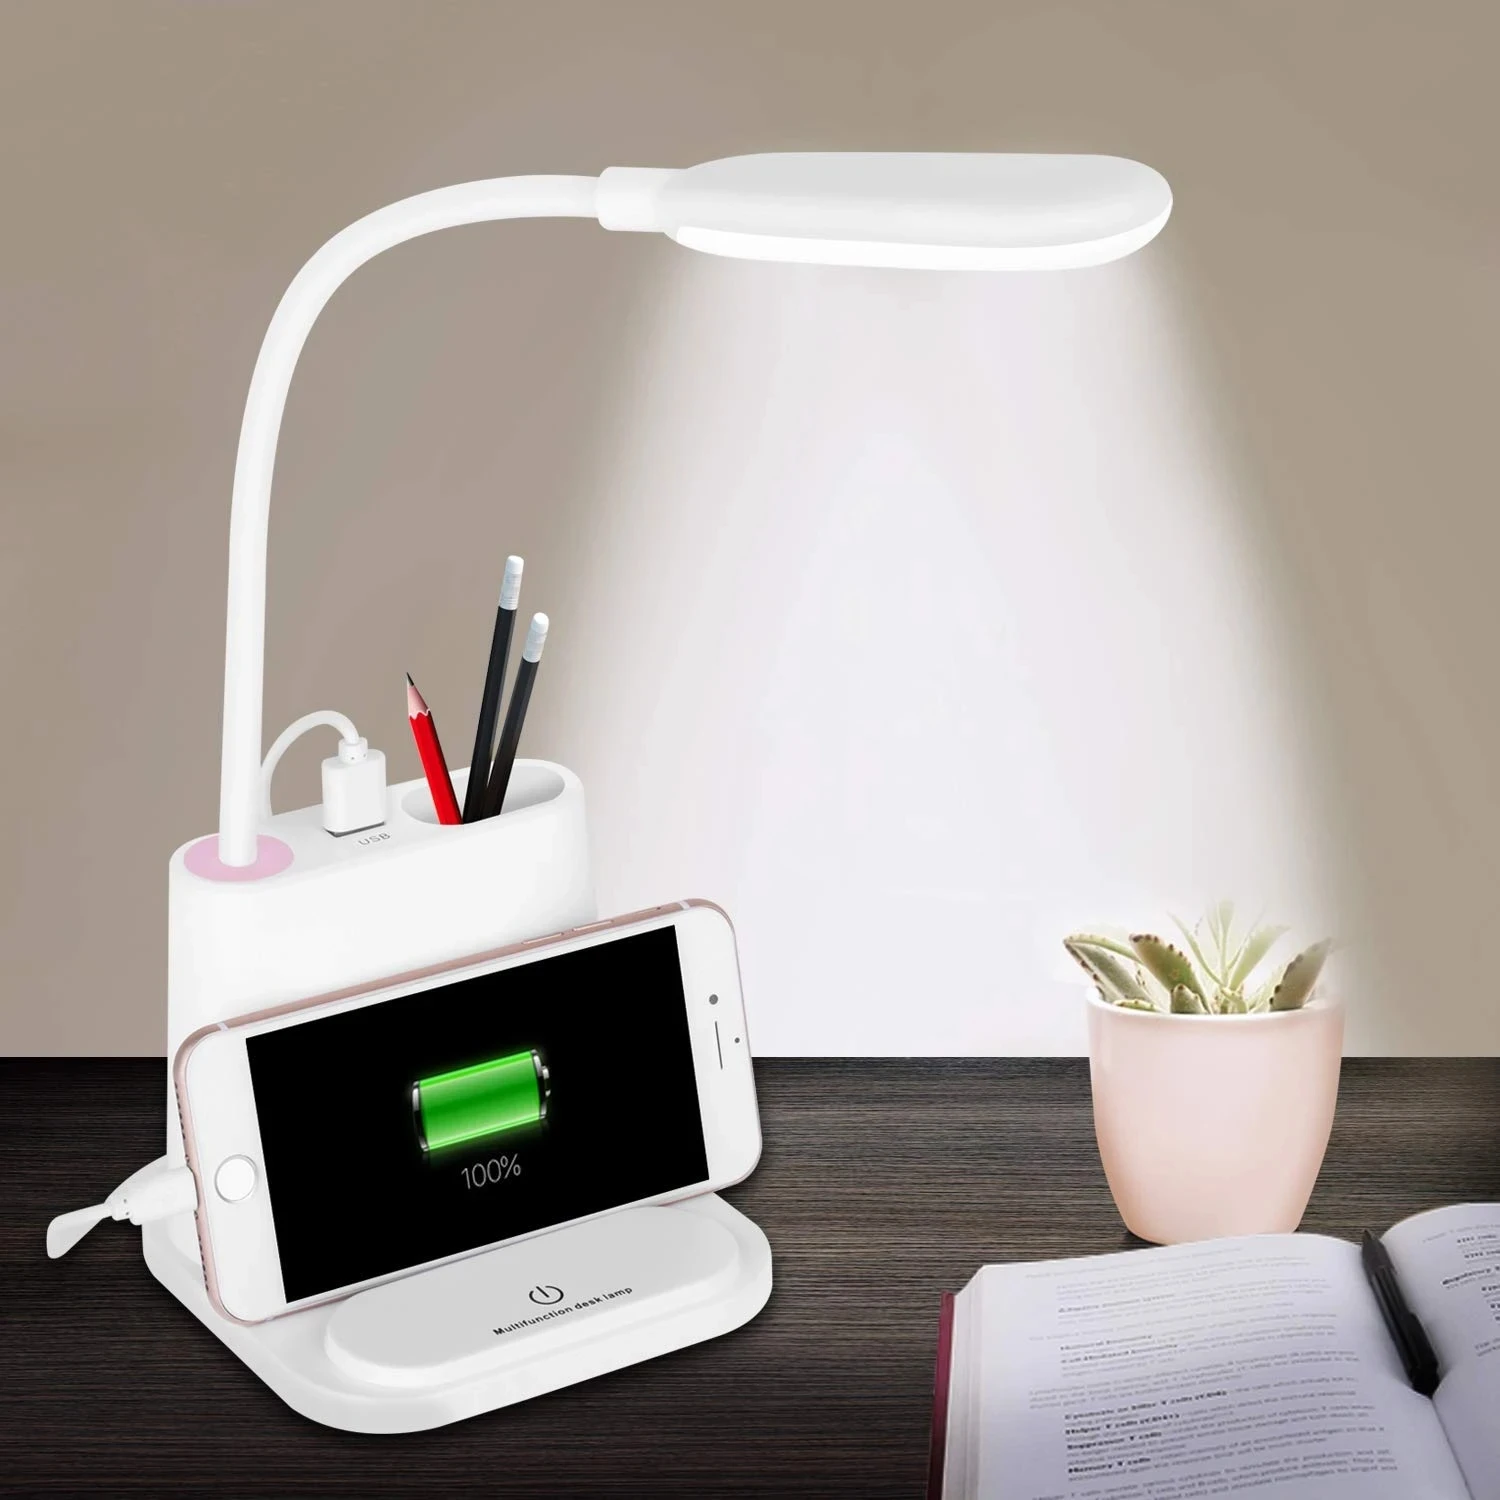 LED Desk Lamp,Rechargeable Lamp with USB Charging Port & Pen Holder, 2 Color Modes, Eye Protection for College Dorm Reading mini usb plug lamp 5v 1w super bright eye protection book light computer mobile power charging usb small led night light hotsale